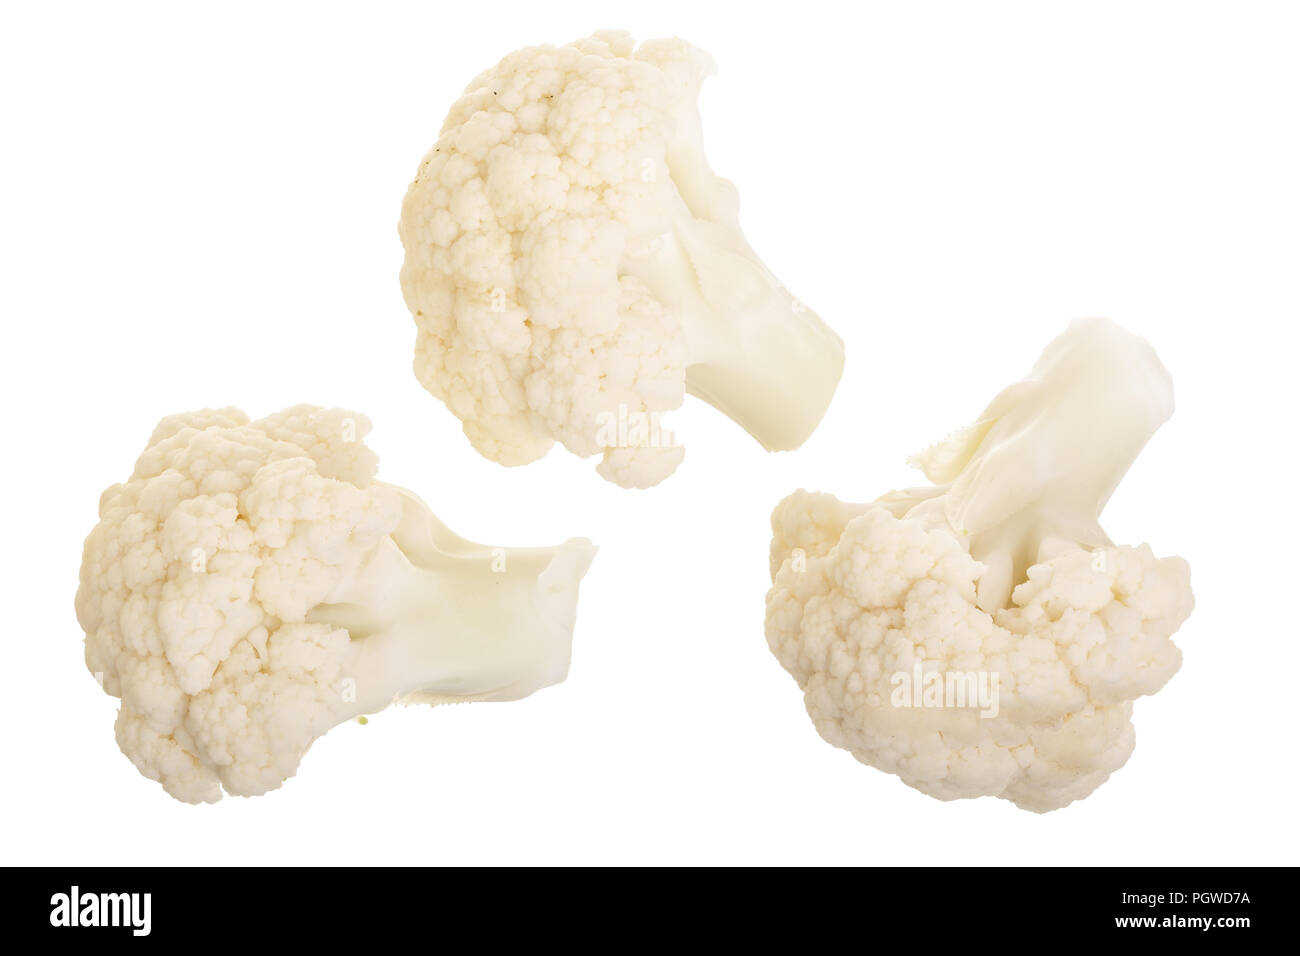 Piece of cauliflower isolated on white background without a shadow. Top view. Flat lay Stock Photo